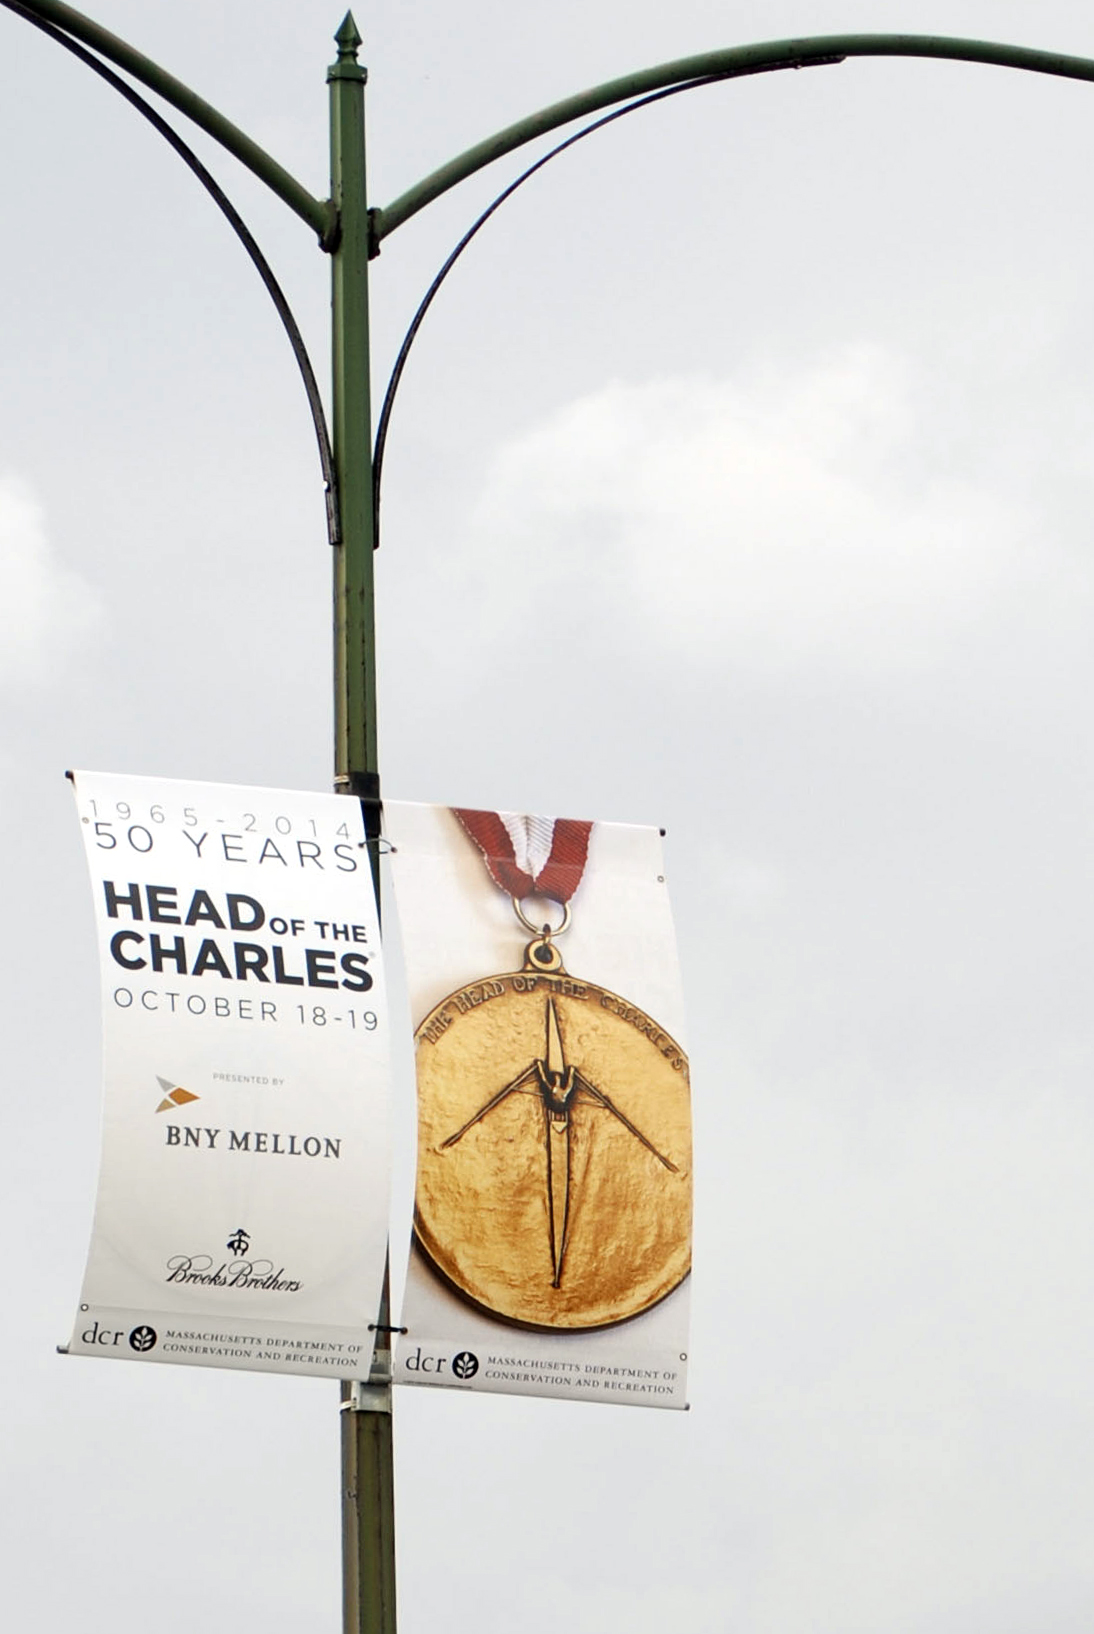 Head of the Charles Light Pole Banners